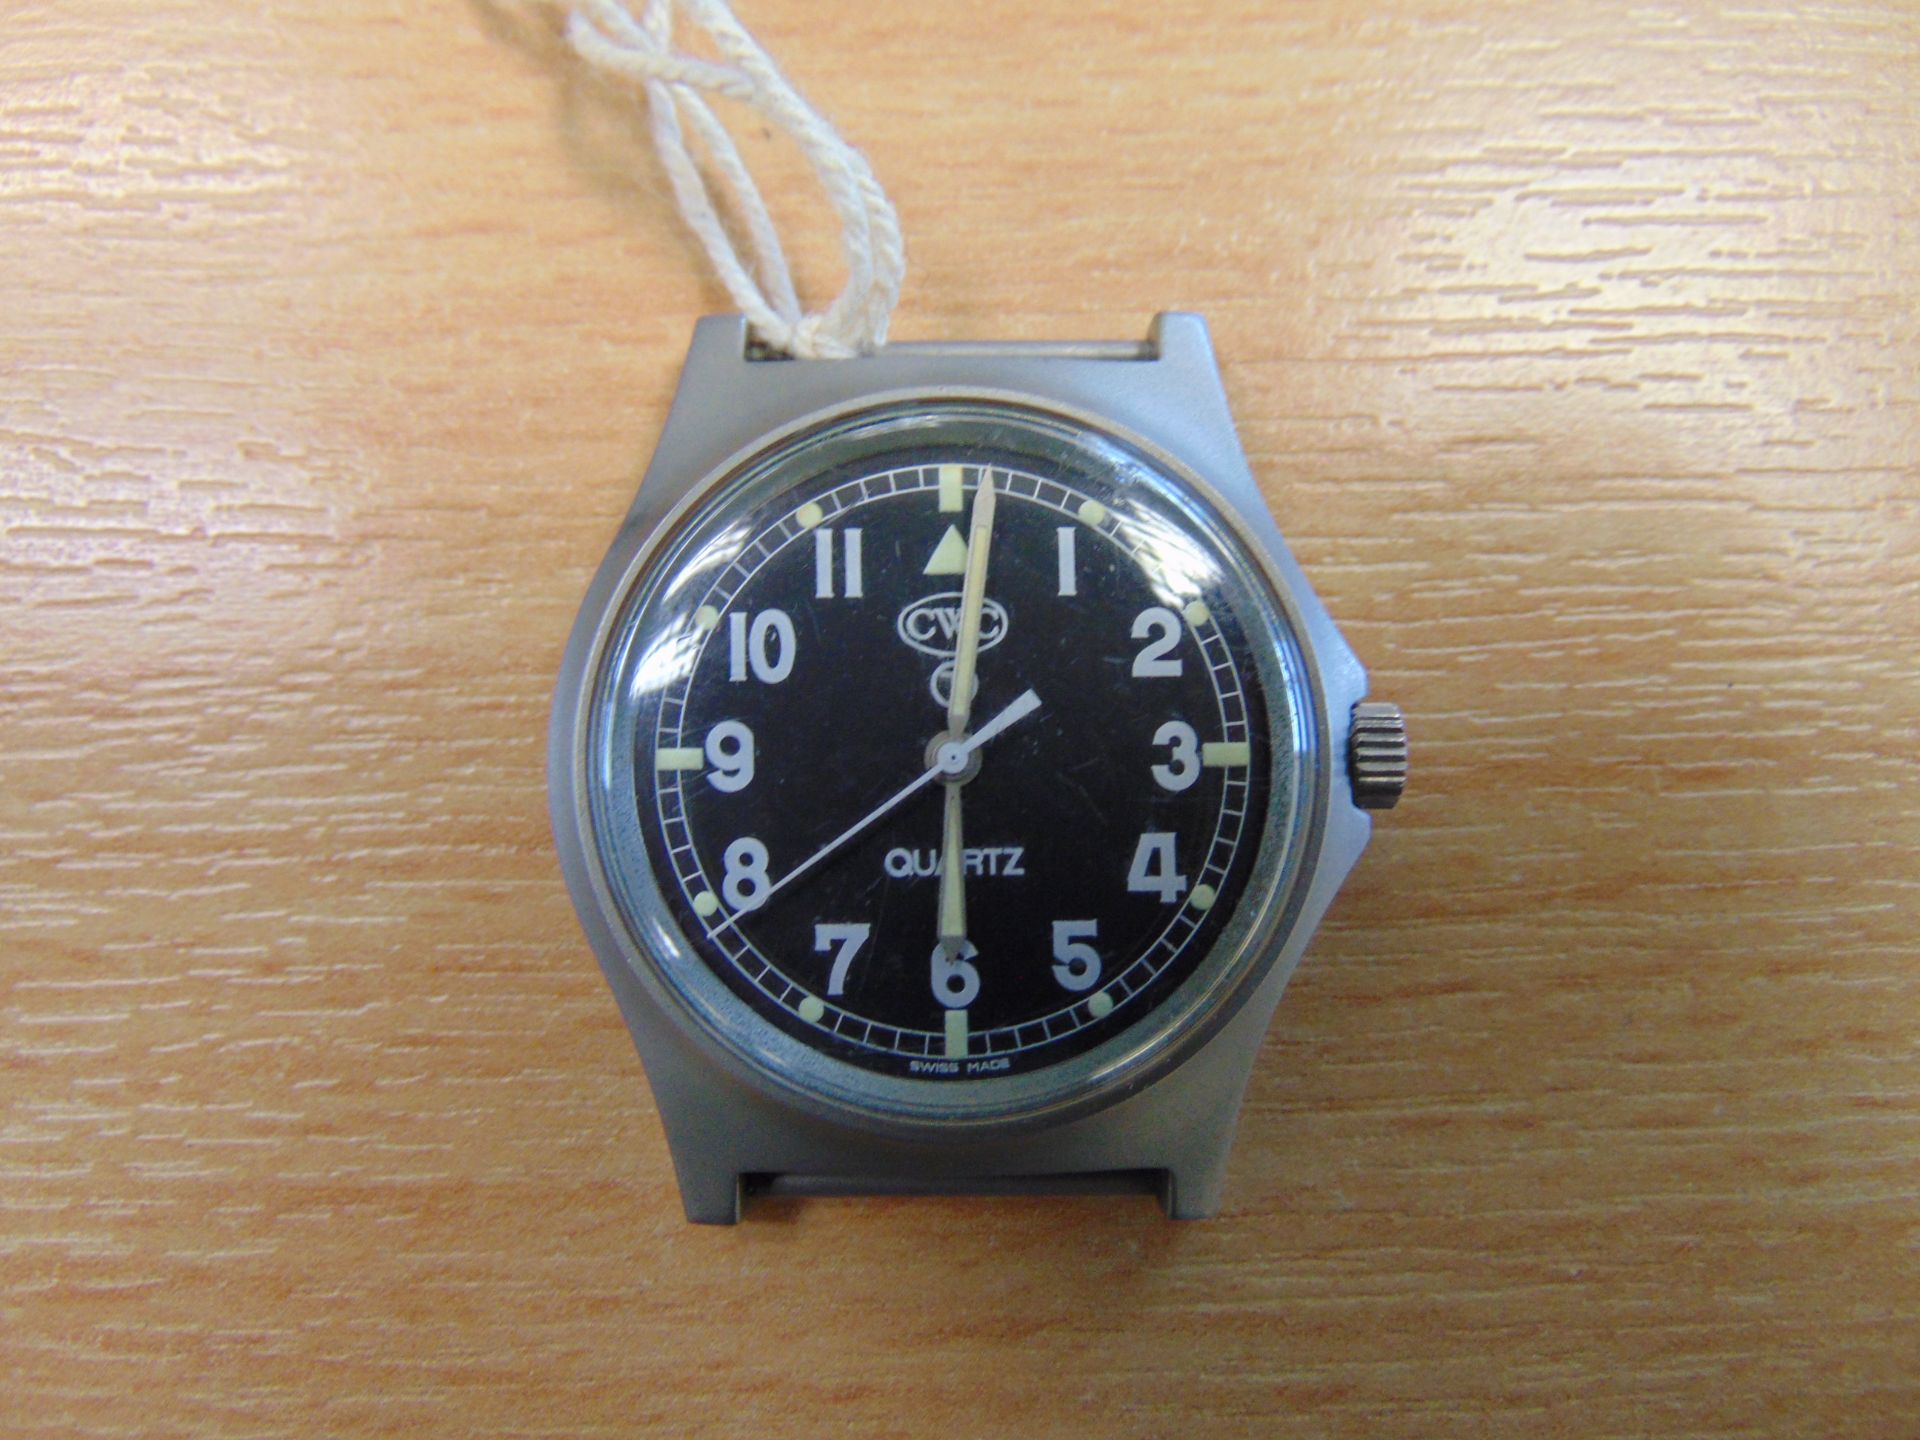 CWC 0552 Royal Marines / Navy Service Watch Nato Marked, Date 1990, * GULF WAR 1 * - Image 2 of 4